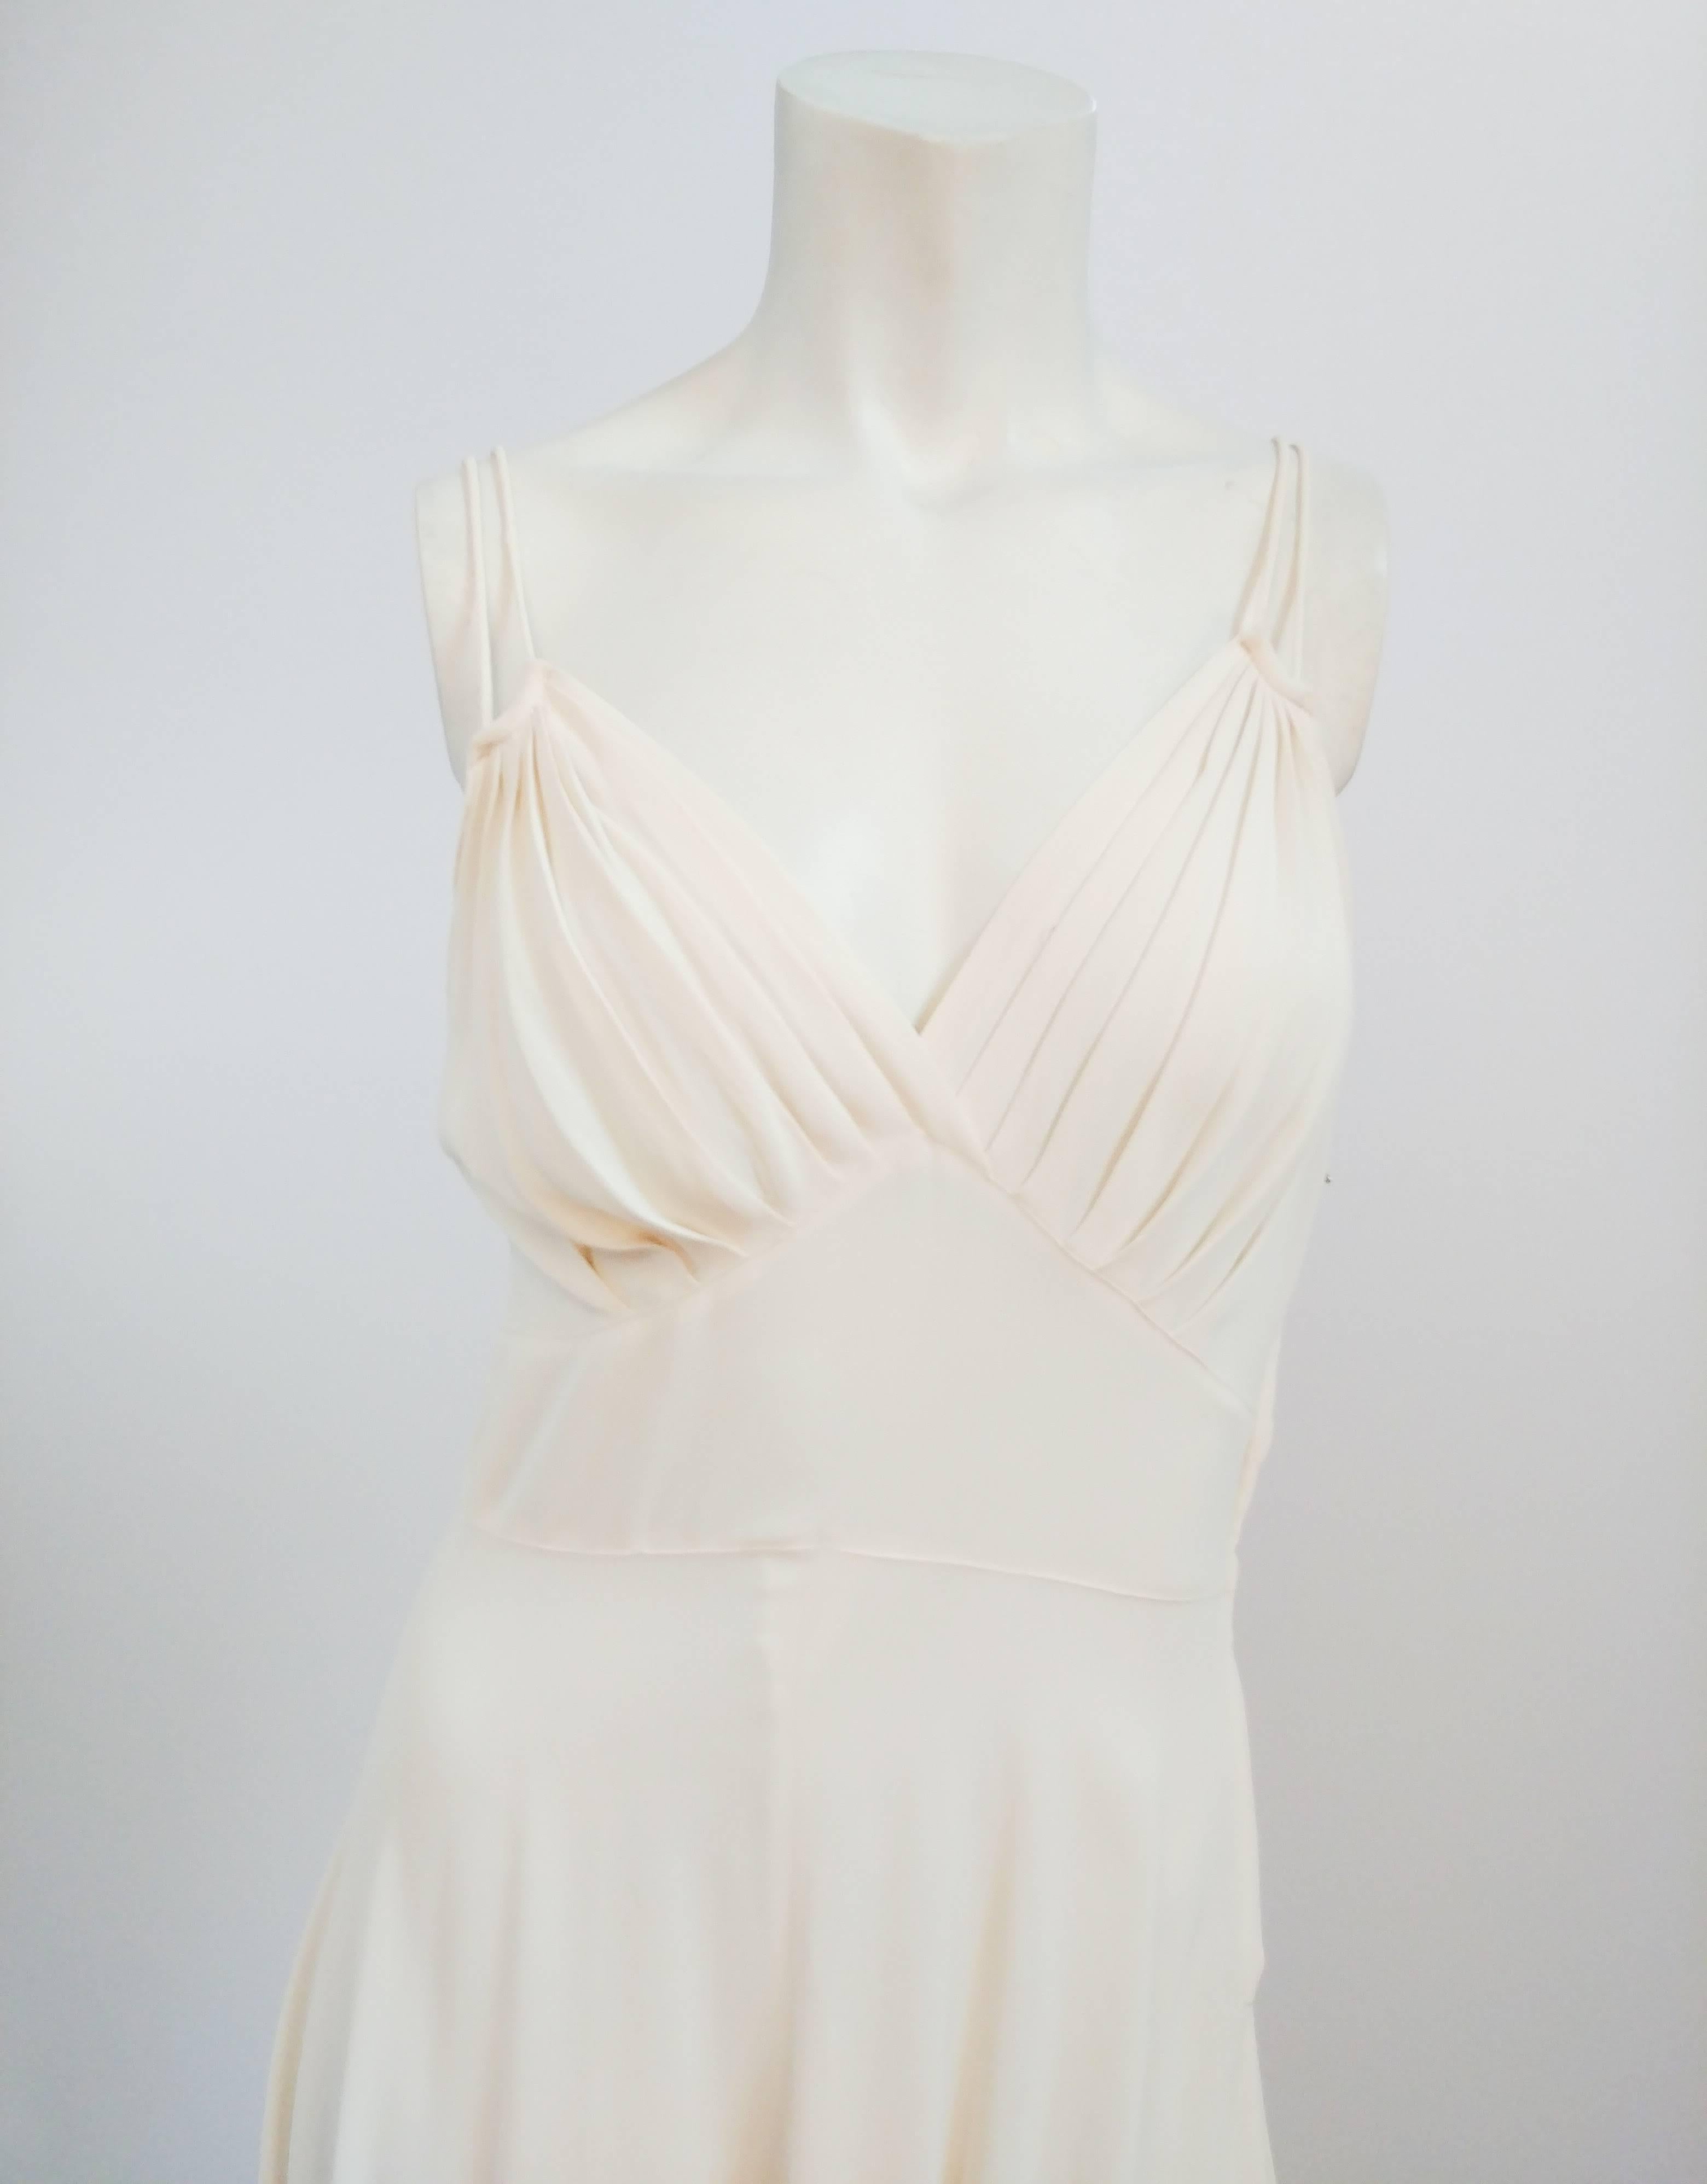 1930s Off-White crepe Double spaghetti Strap Dress. Gathered under the bust cups with inverted basque waist. Gathered at the waist line with a metal size zipper closure. The silhouette of this dress reflects the glamour of 1930s Hollywood.